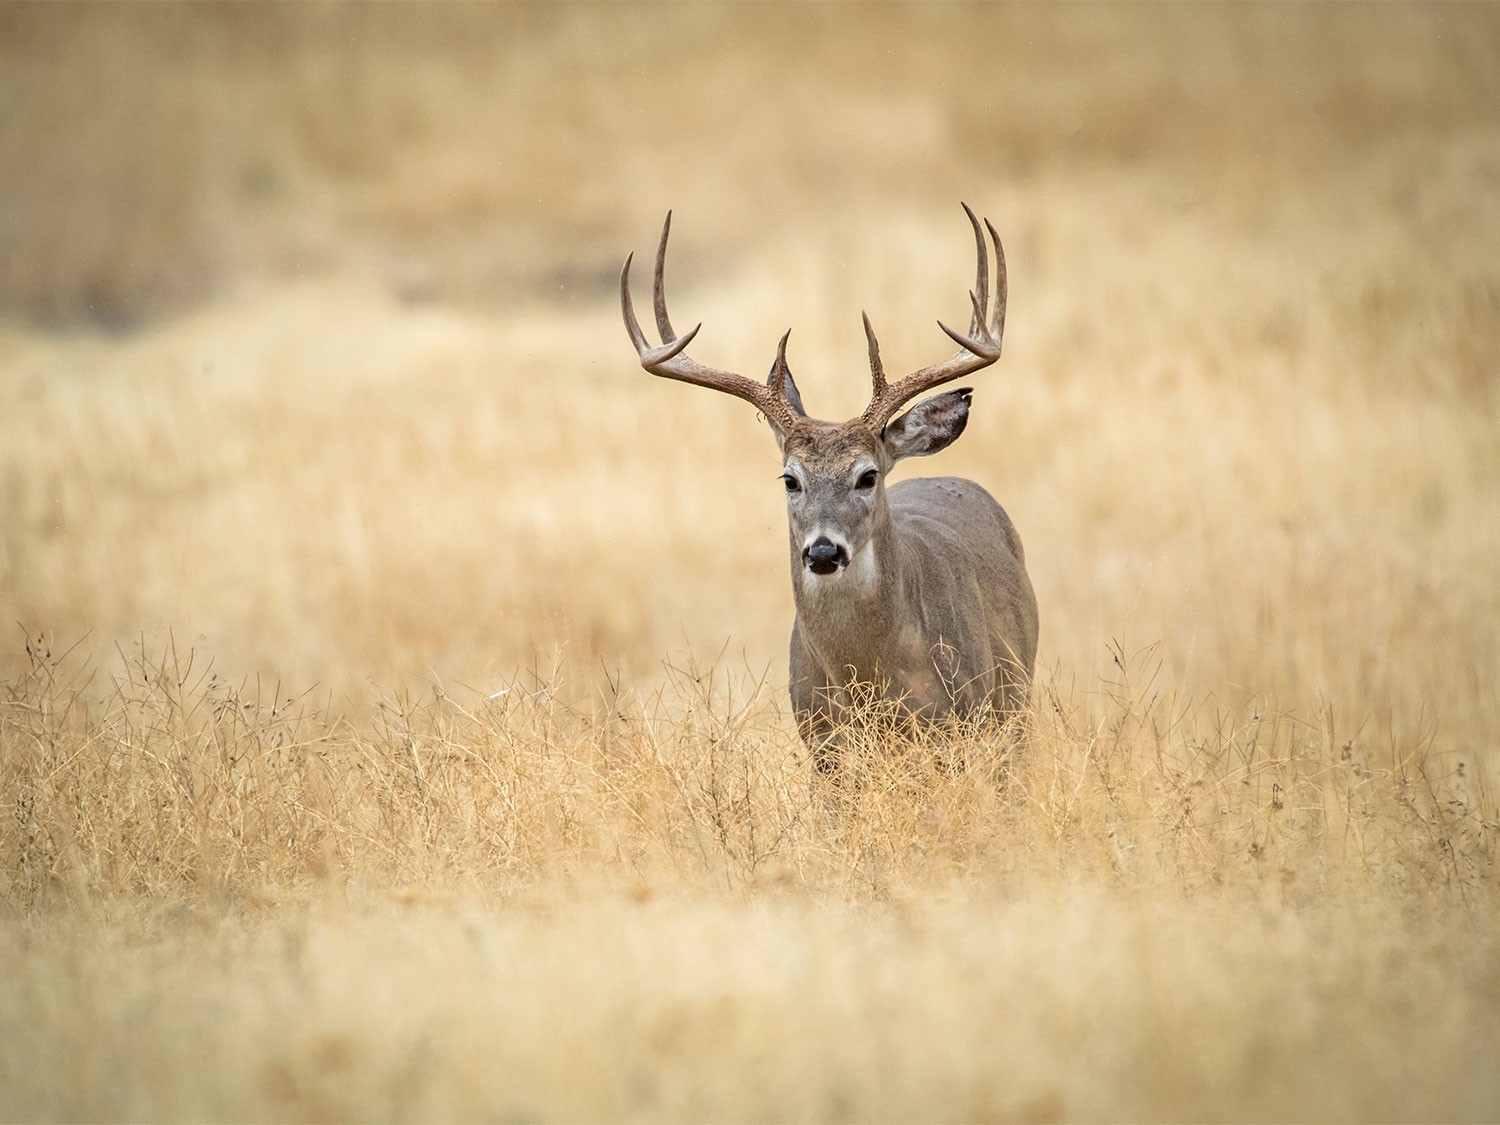 The 7 Best Days Of The 2020 Whitetail Deer Rut | Field &amp; Stream-Peak Rut Predictions For 2021